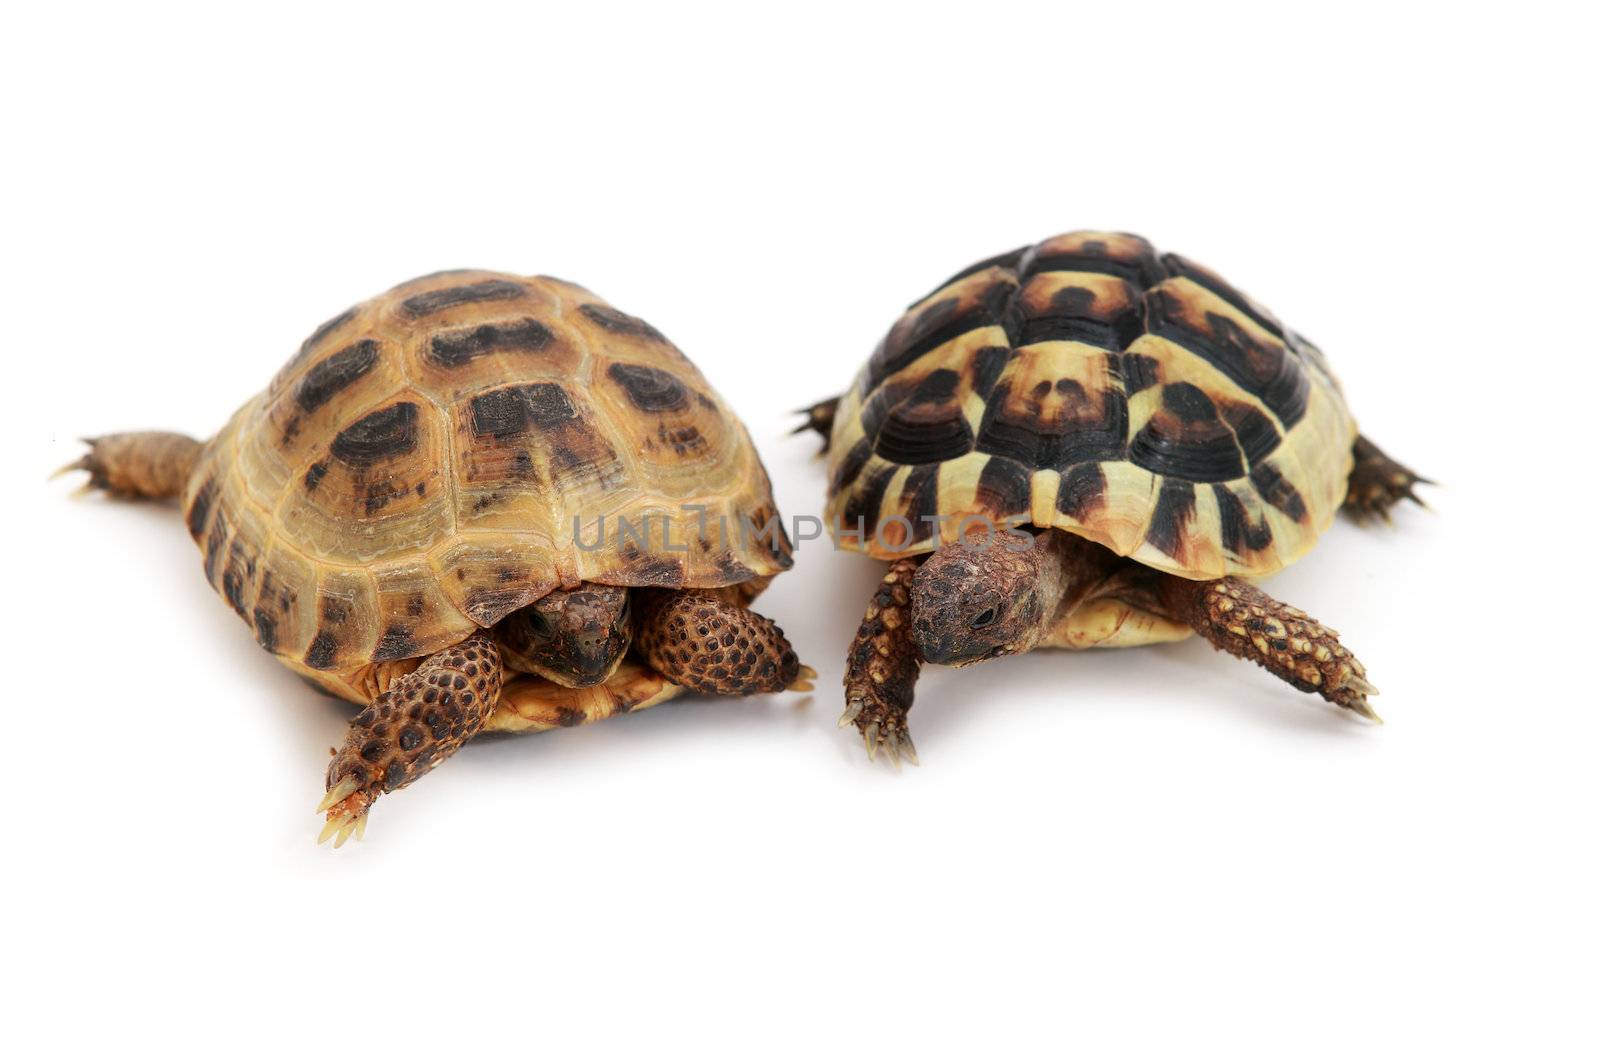 Russian tortoise and Hermann's tortoise on white by catolla